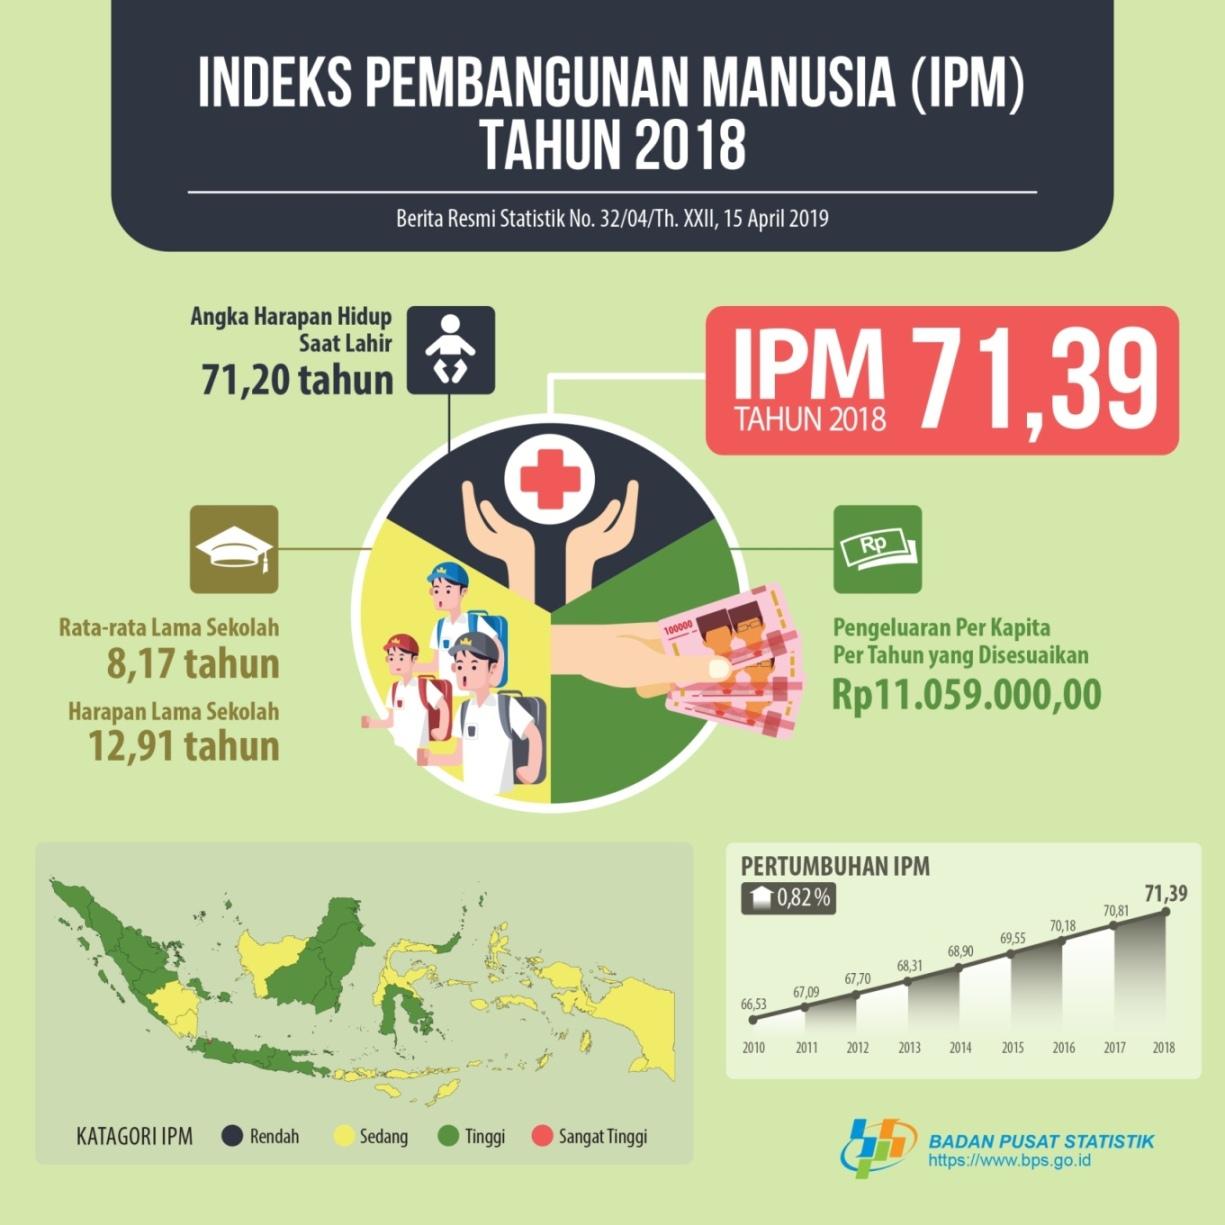 In 2018, Indonesia's Human Development Index (HDI) reached 71.39